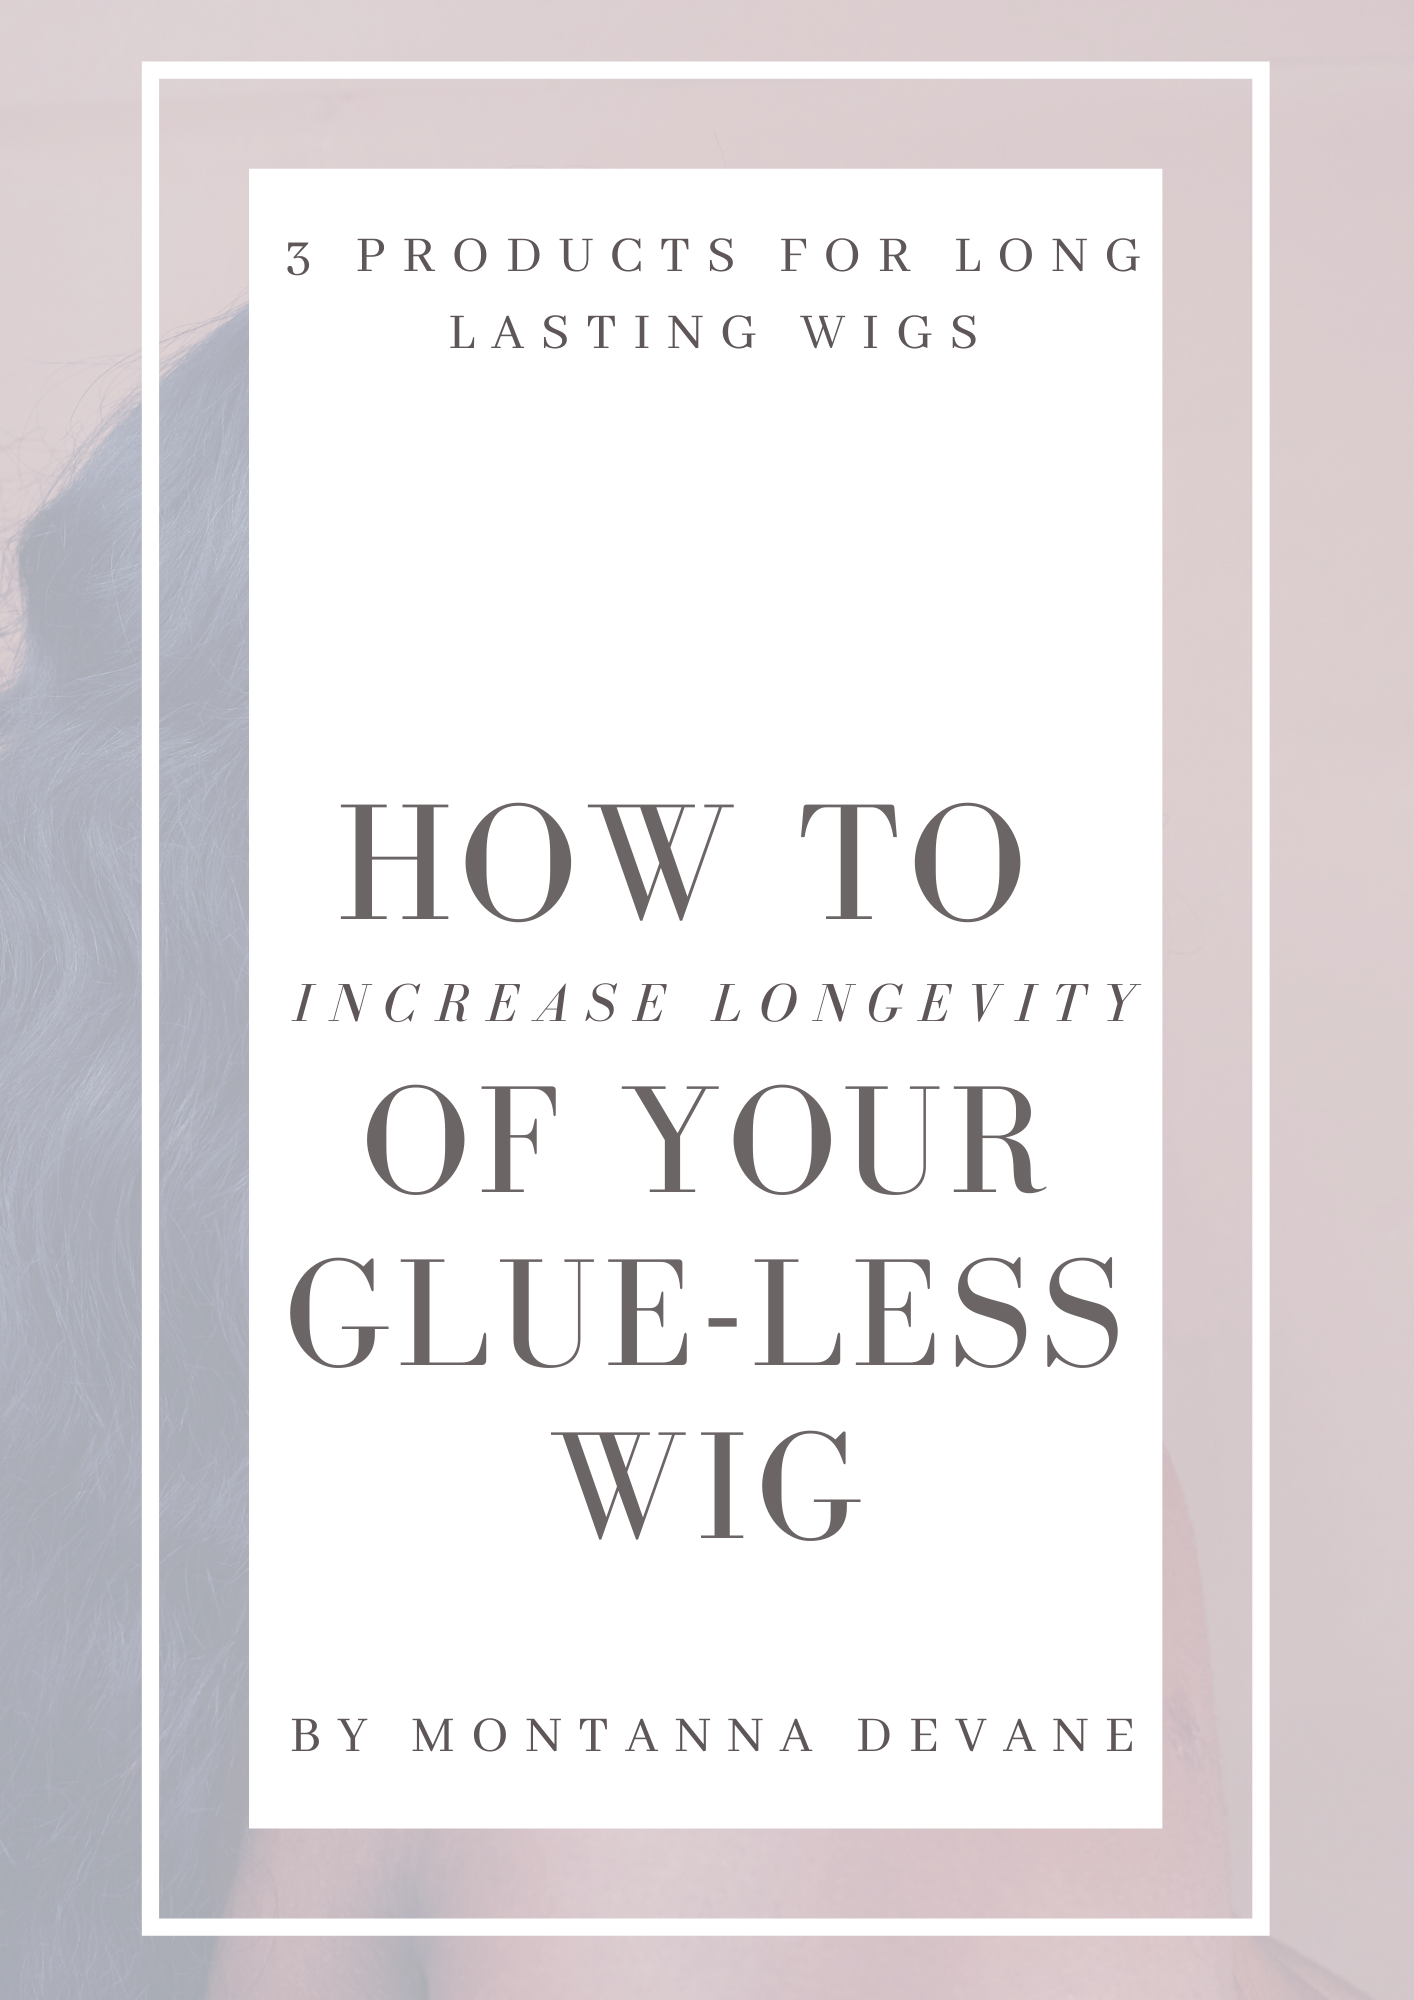 How to Increase Longevity of Your Glue-Less Wig